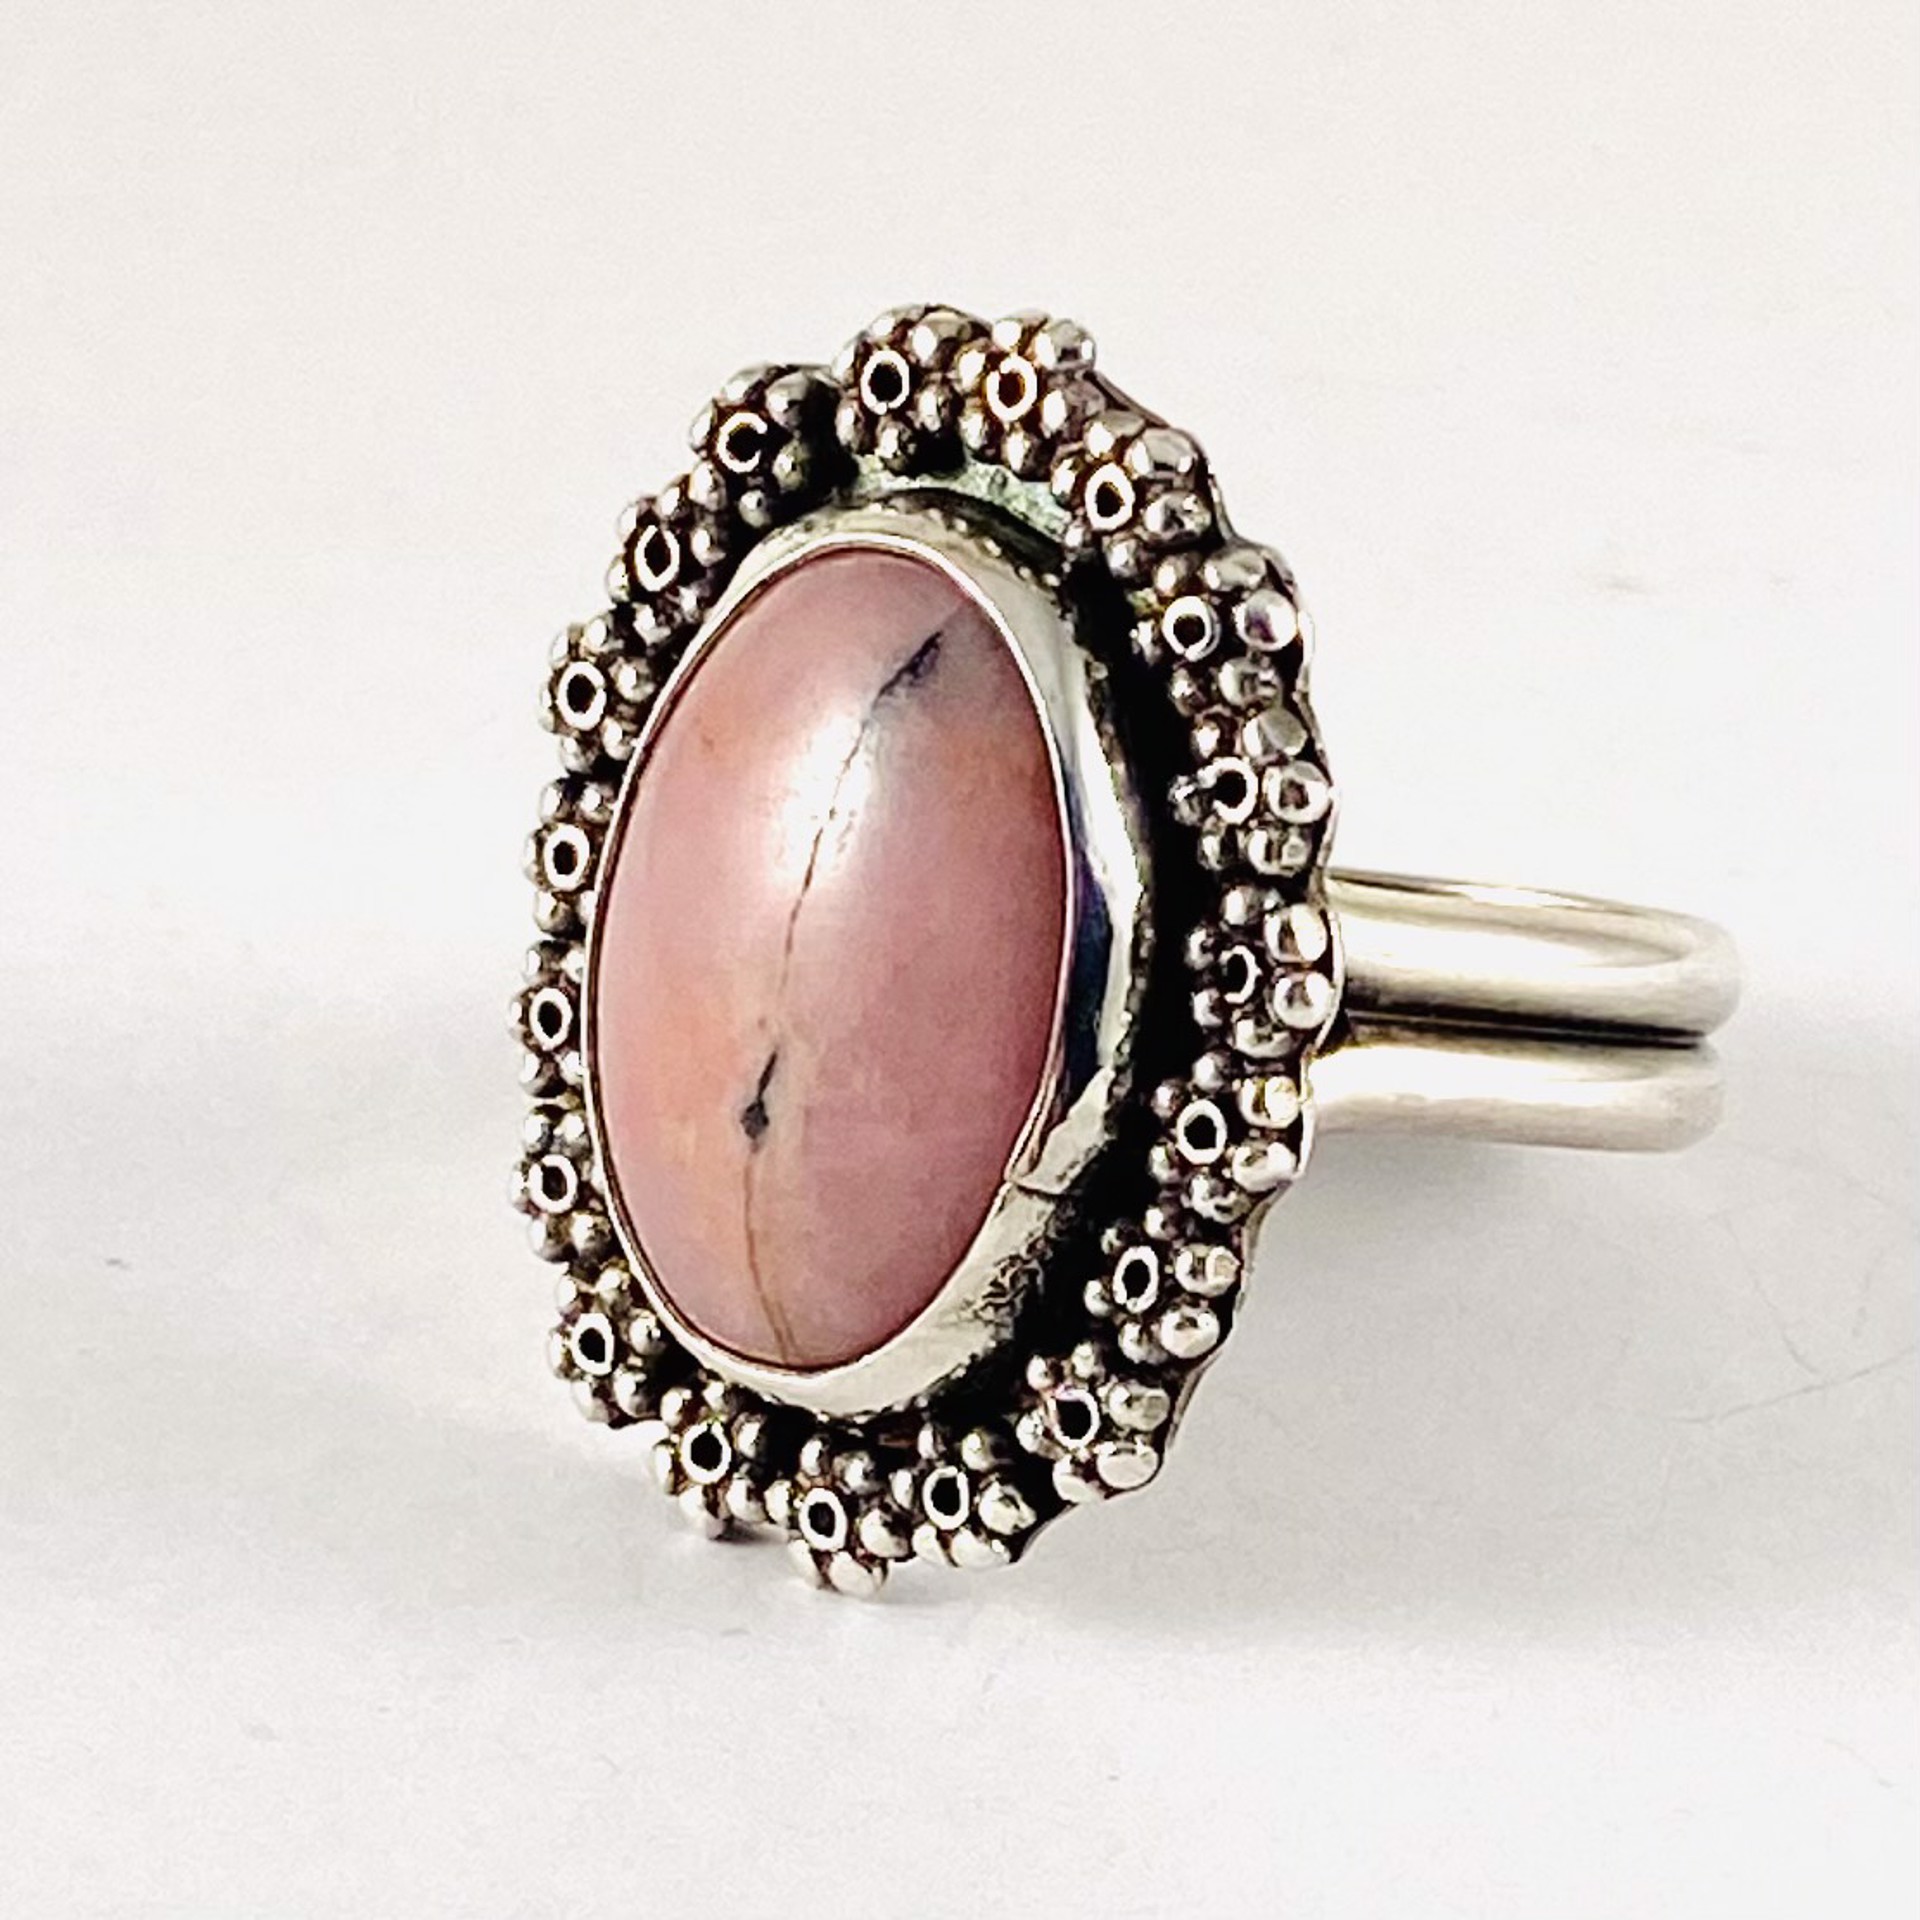 AB21-9 Rhodonite Ring; Size 9 by Anne Bivens